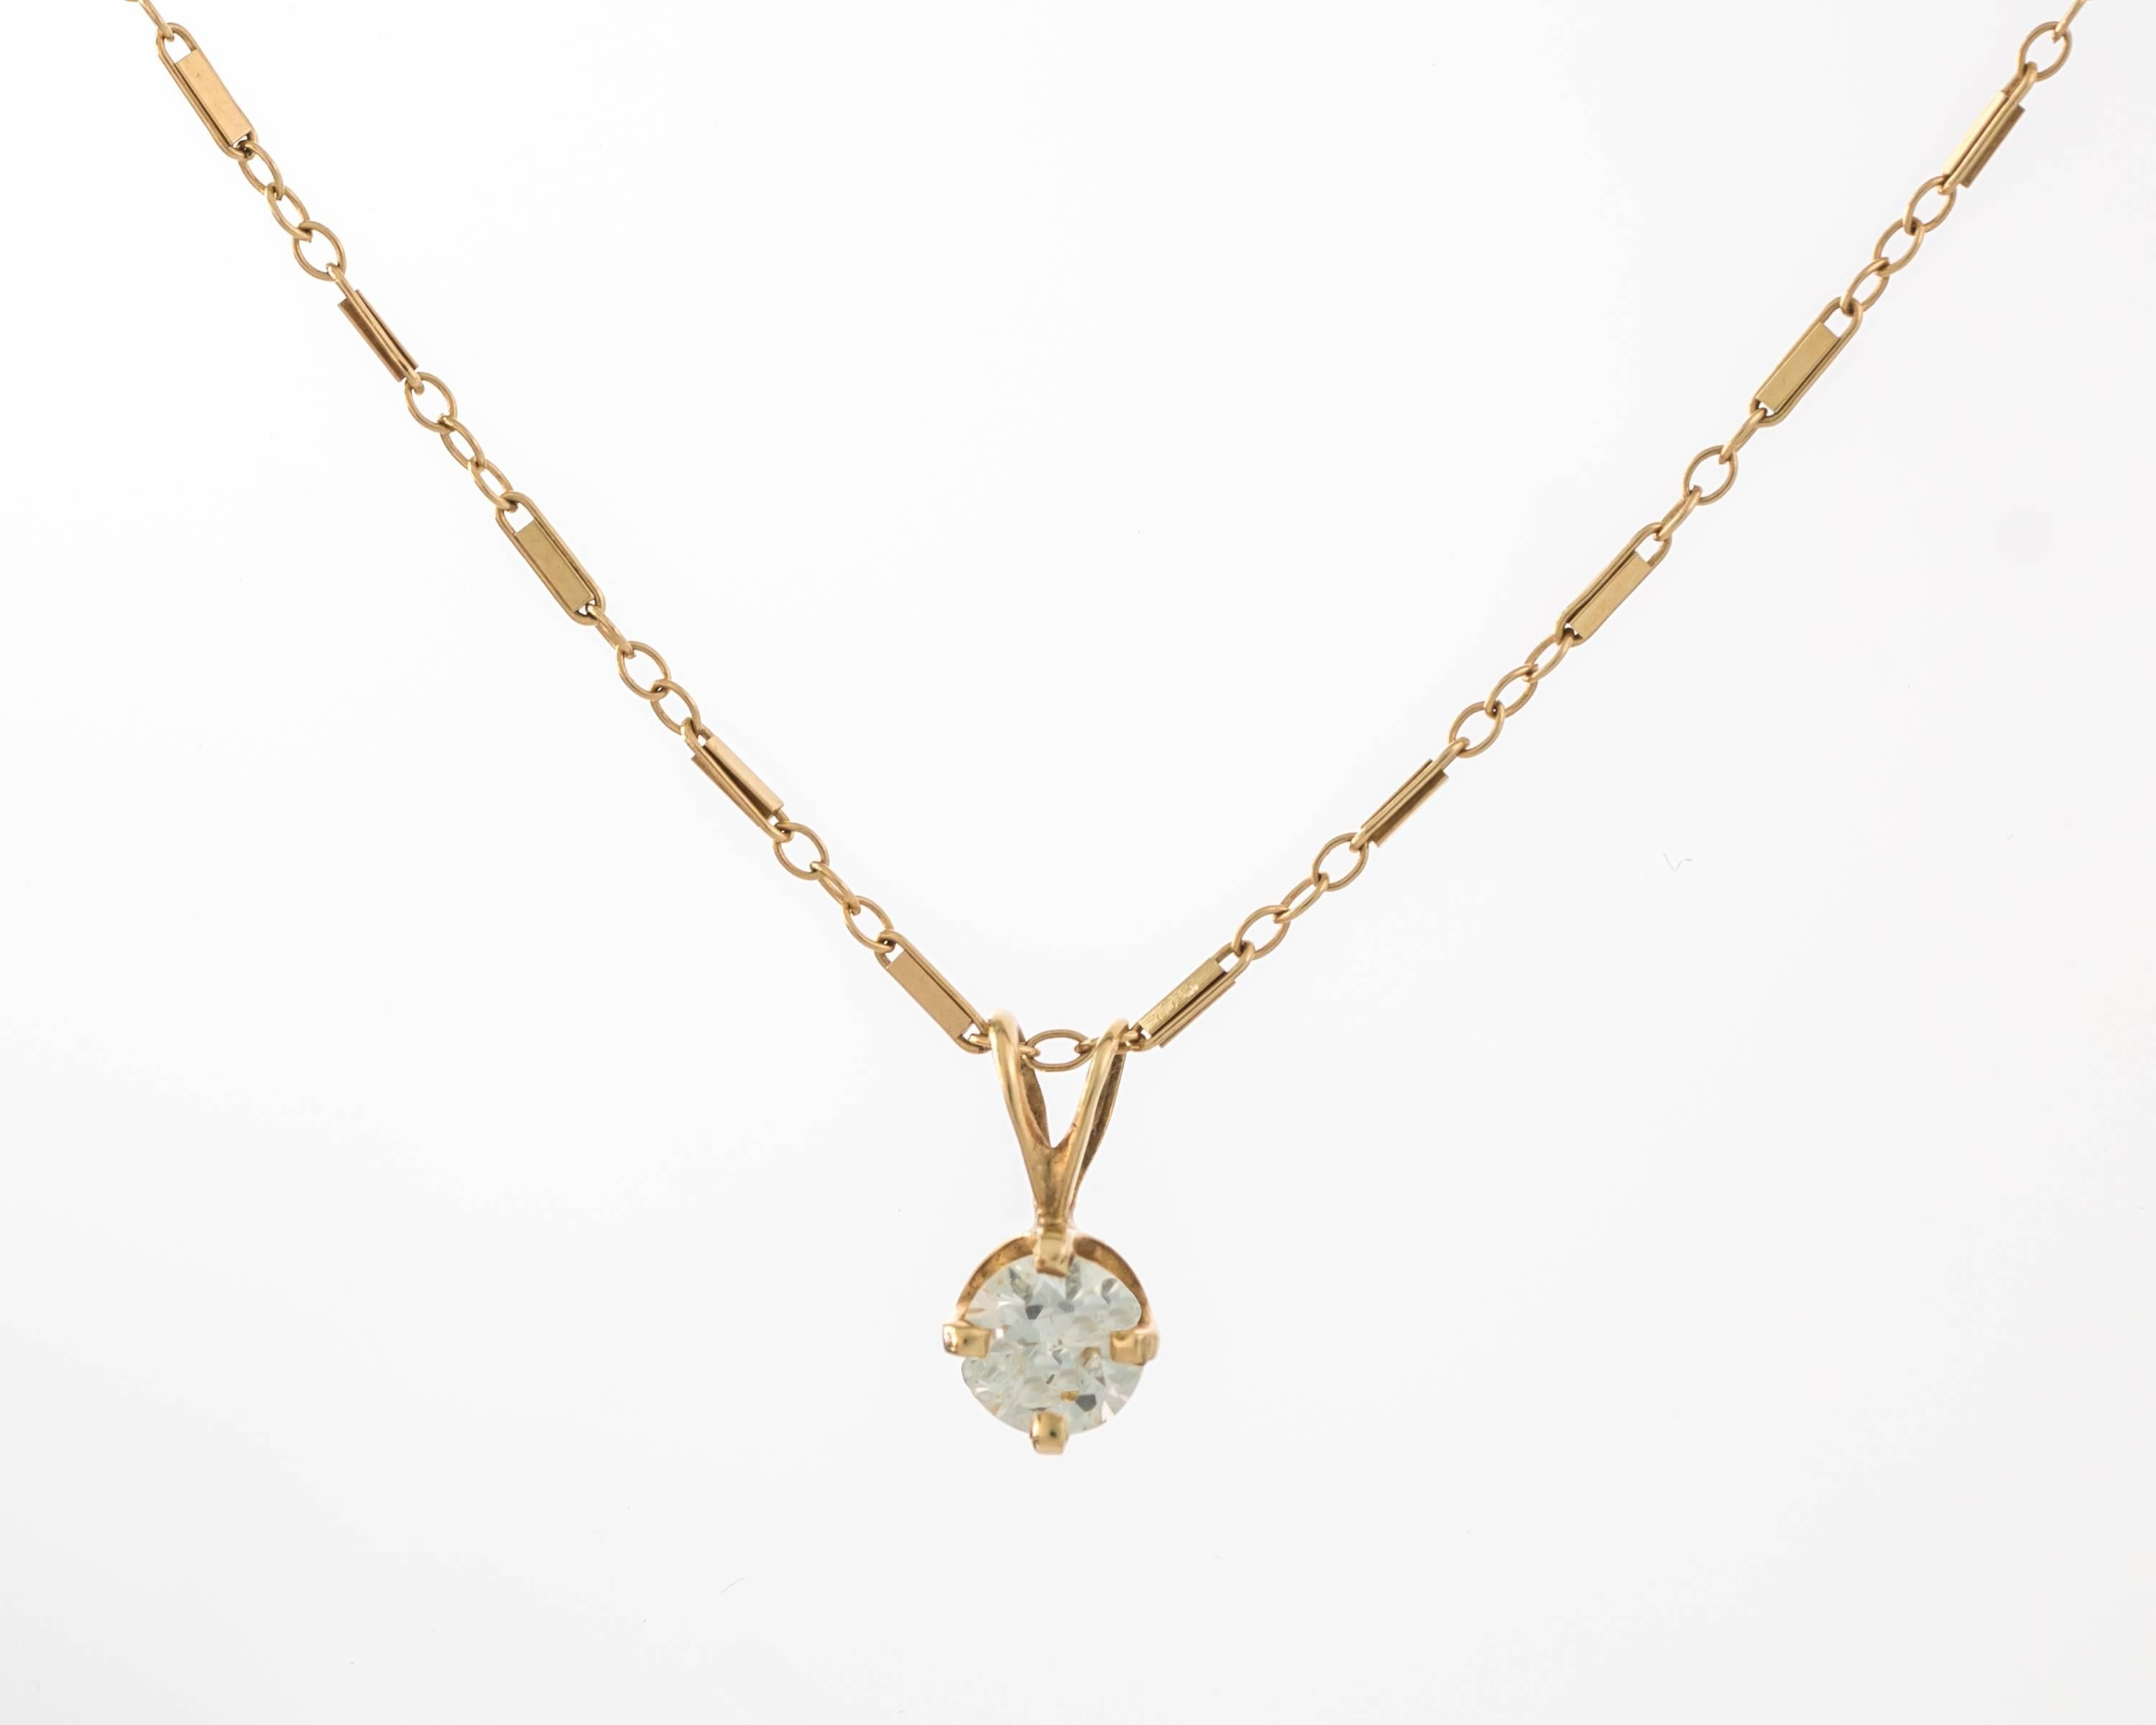 This 1930s Art Deco .75 Carat Old European Diamond Solitaire Necklace features a 14 karat yellow gold 4 prong setting and delicate chain which have developed a slight rose tone patina over the decades. This beautiful necklace features a unique